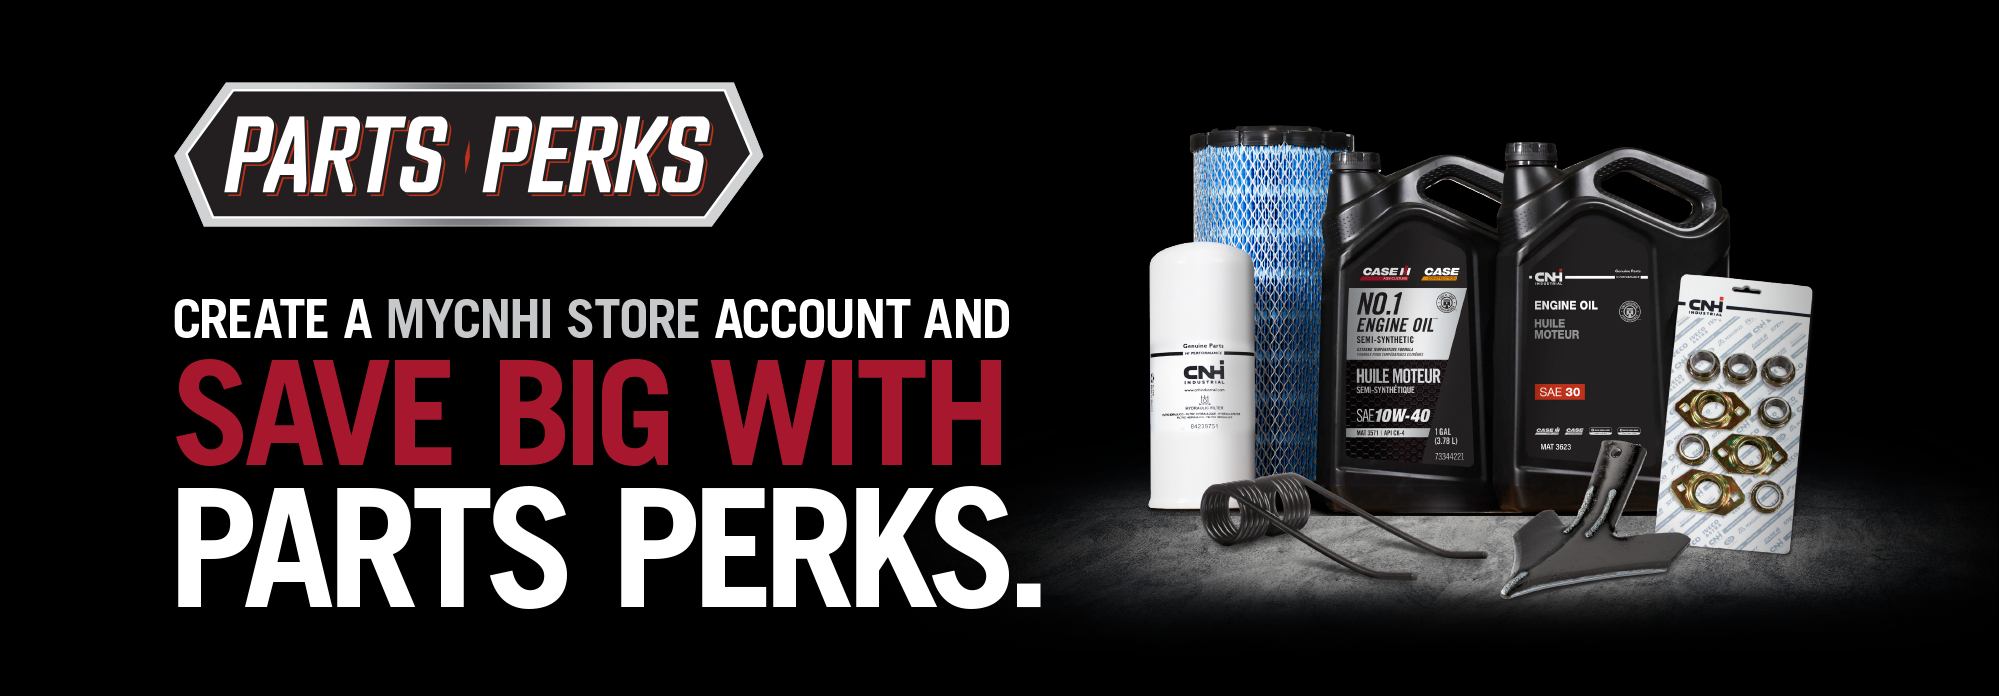 Parts Perks | Create a MyCNHi store account and get ready to SAVE BIG.